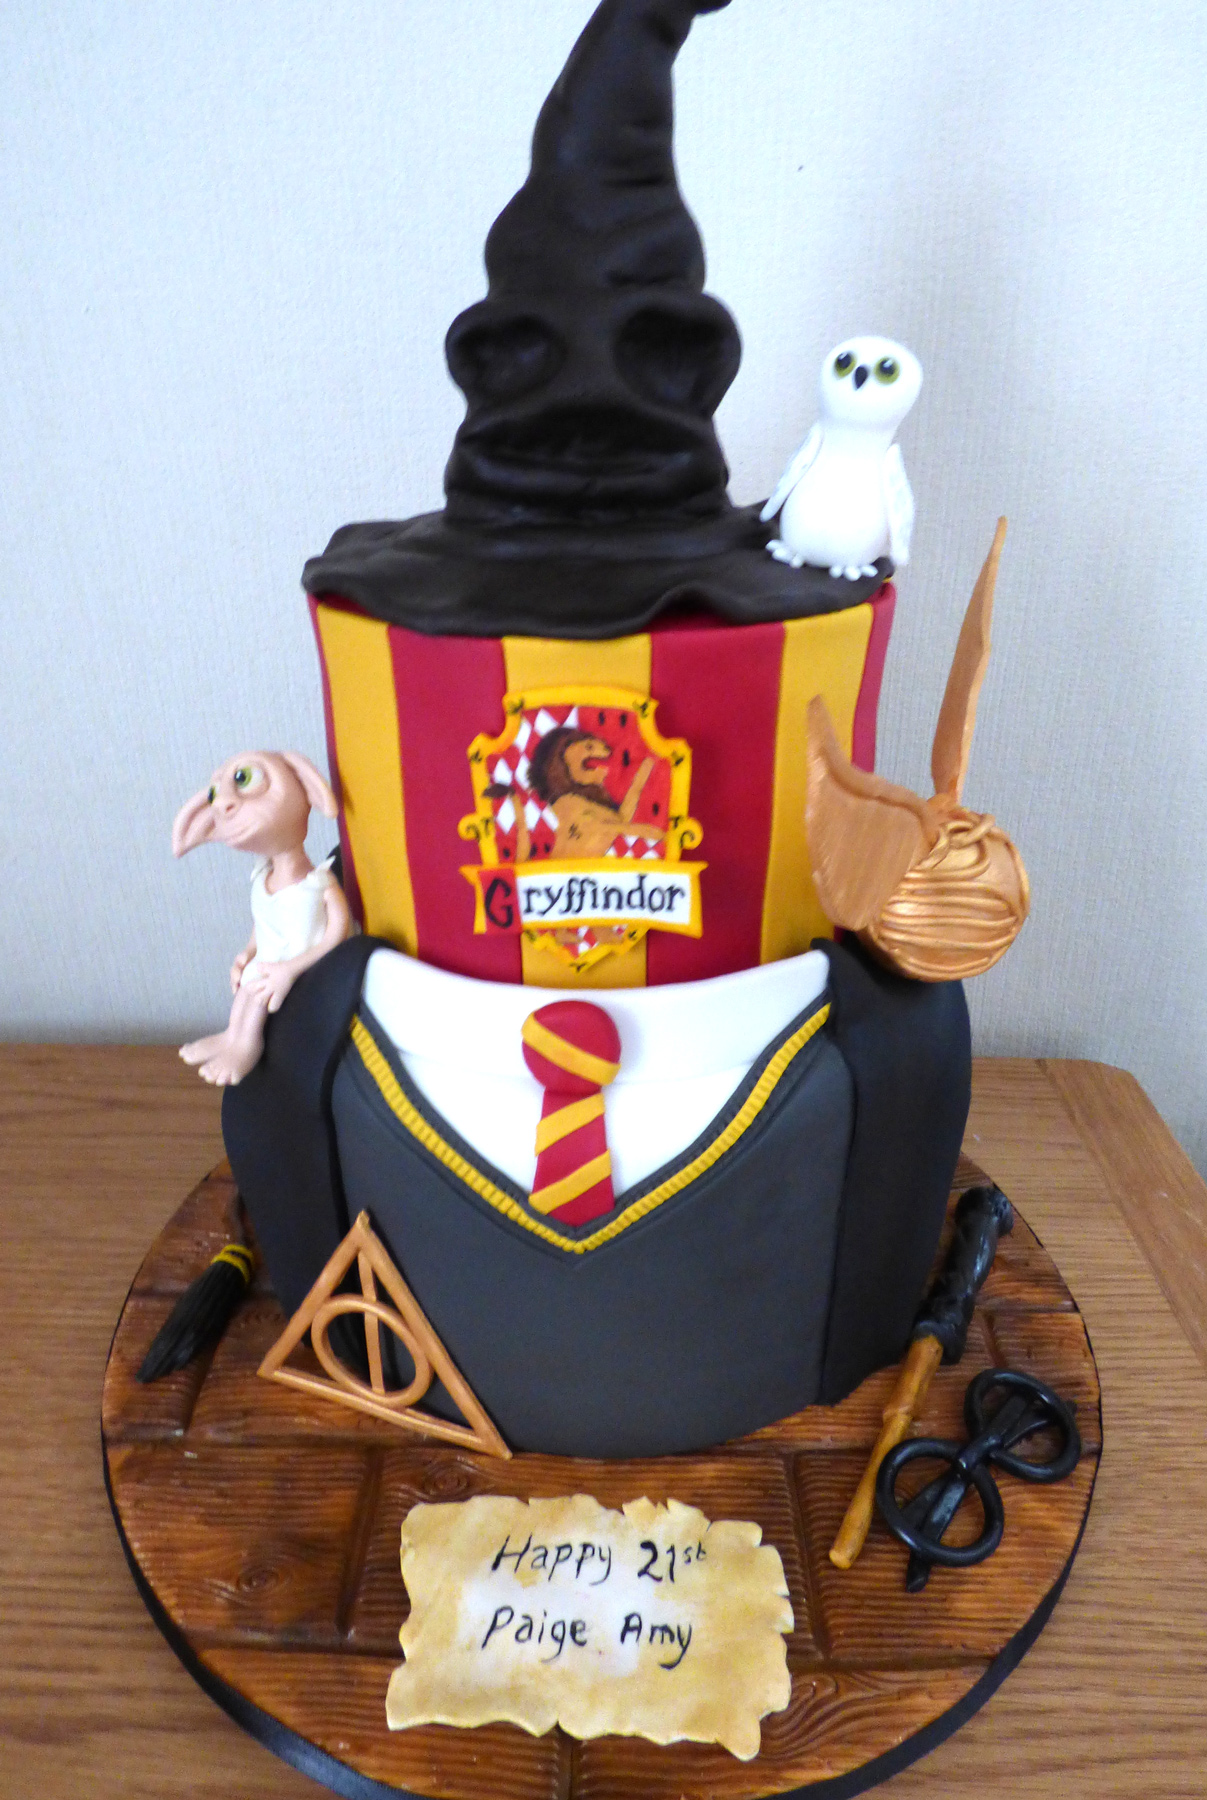 HARRY POTTER CAKE | THE CRVAERY CAKES